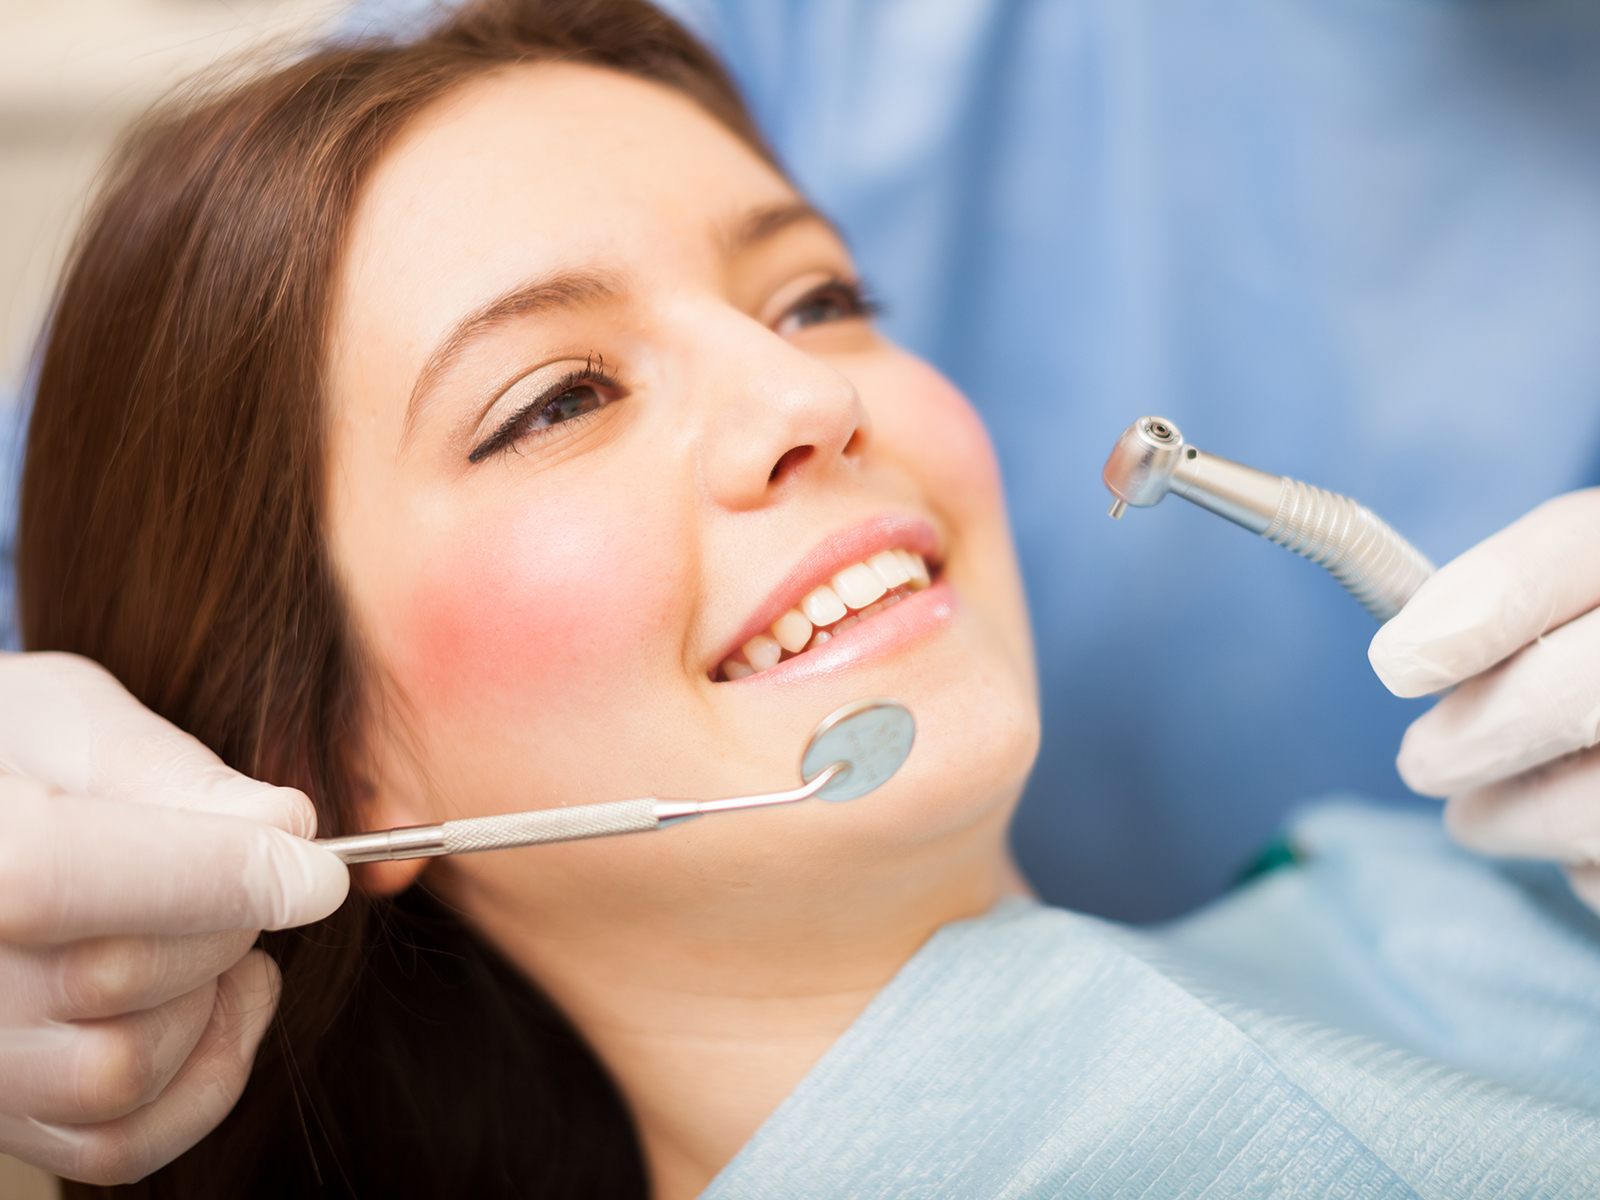 What are the possible symptoms of a root canal infection?